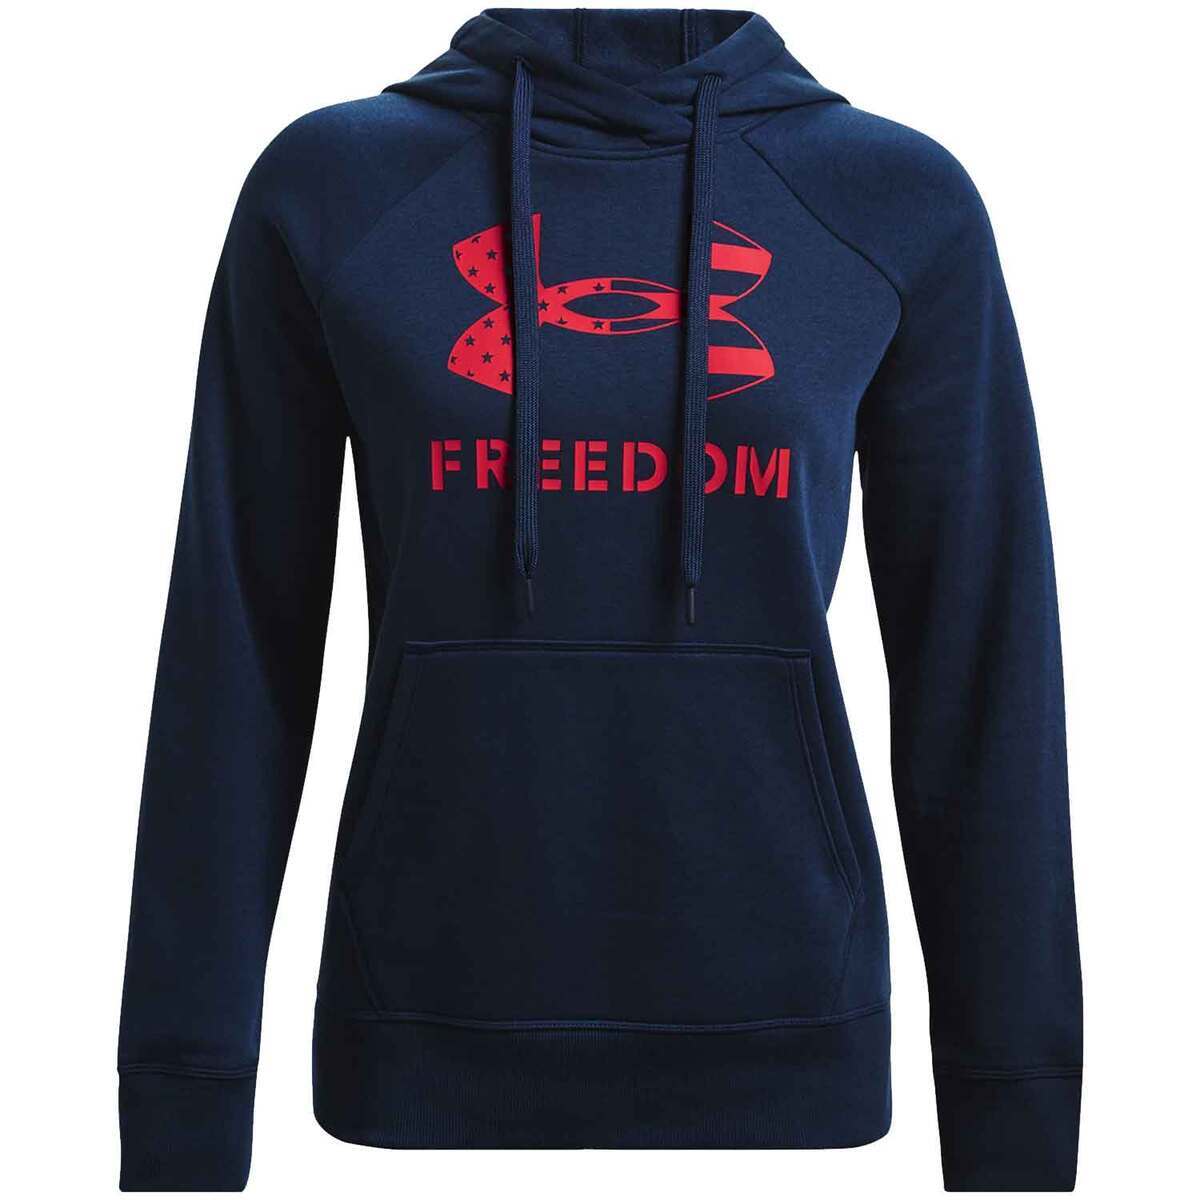 Under Armour Women's Freedom Rival Casual Hoodie - Academy - XL ...